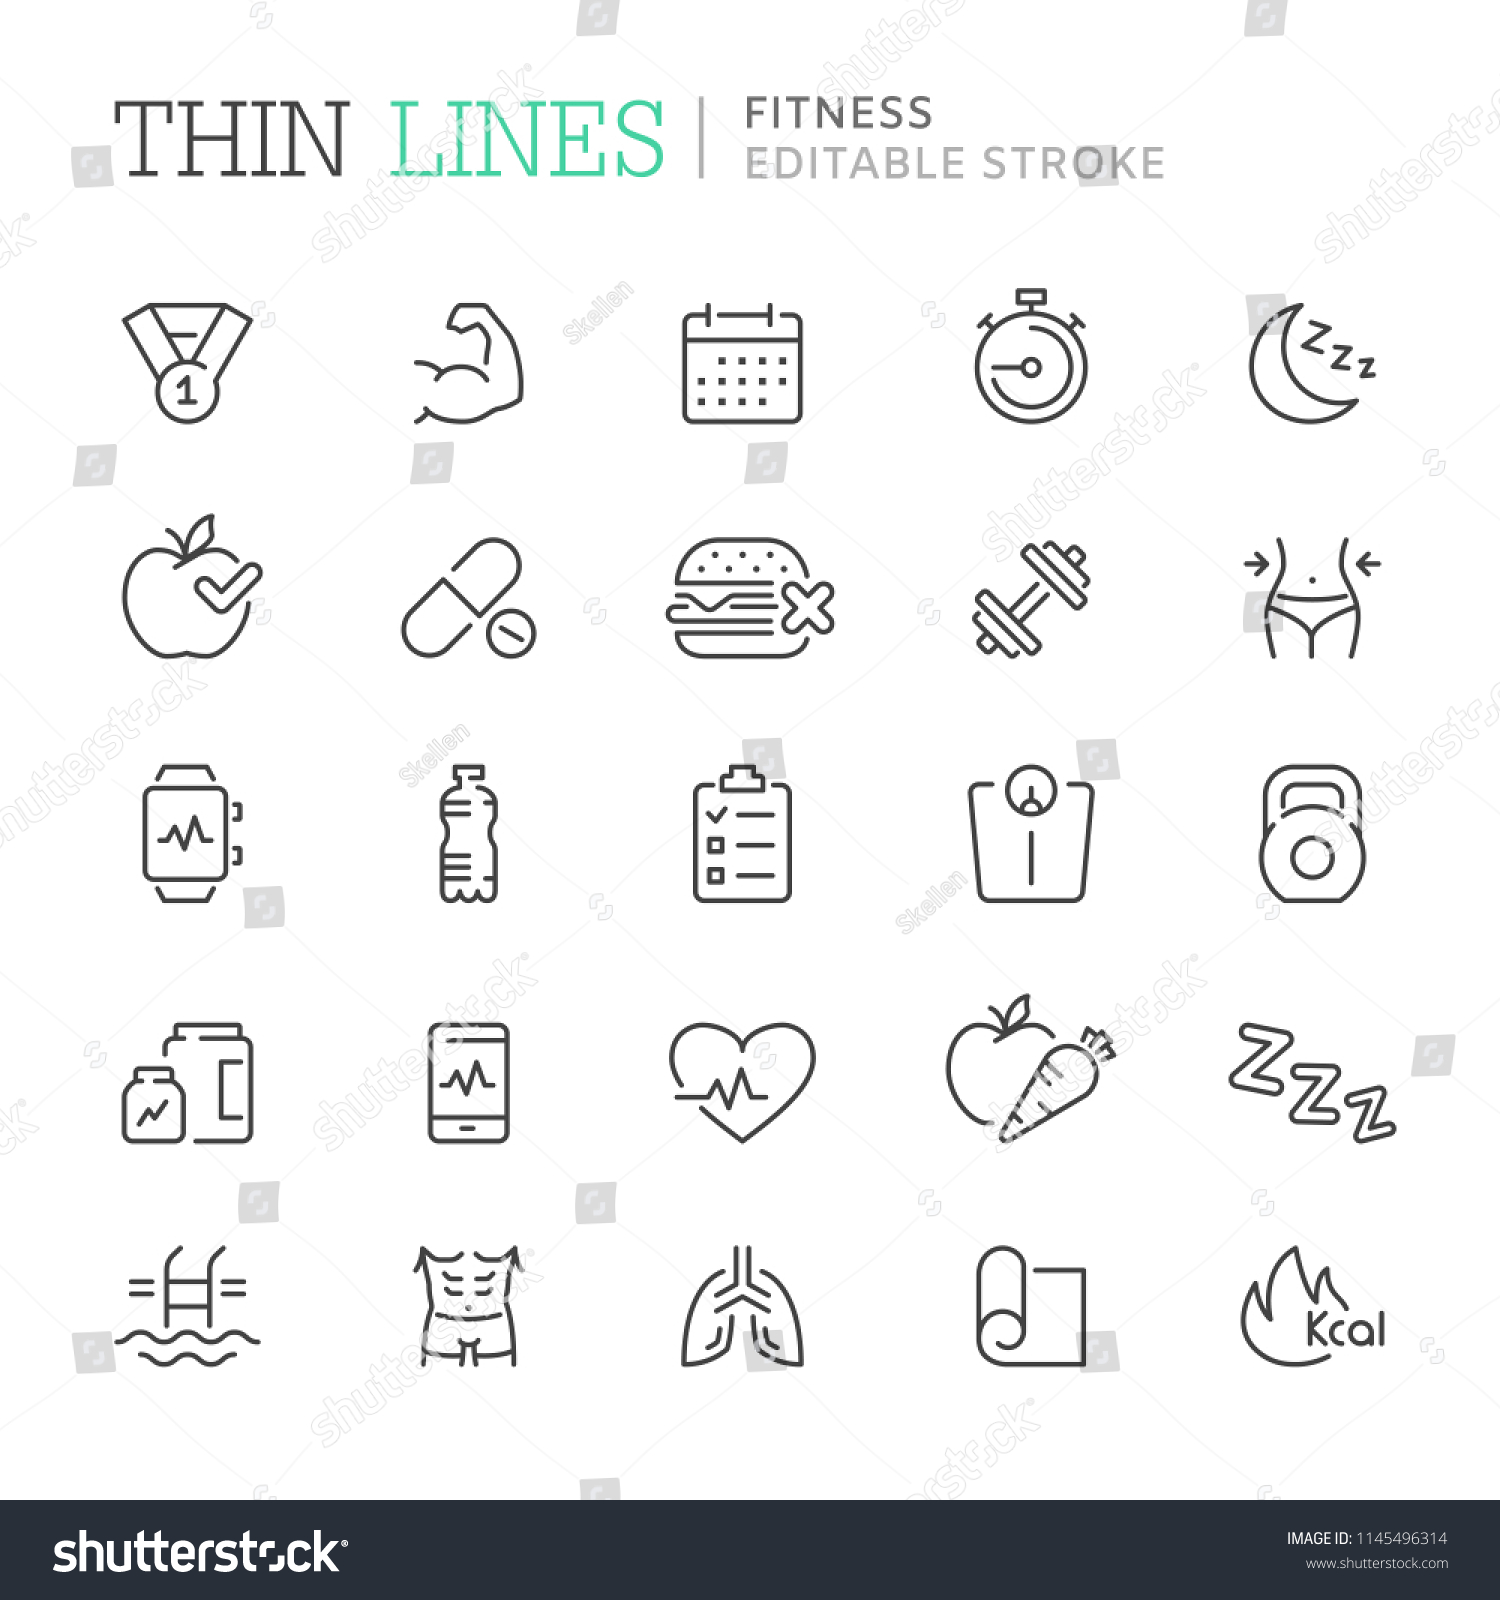 Collection of fitness related line icons. Editable stroke #1145496314